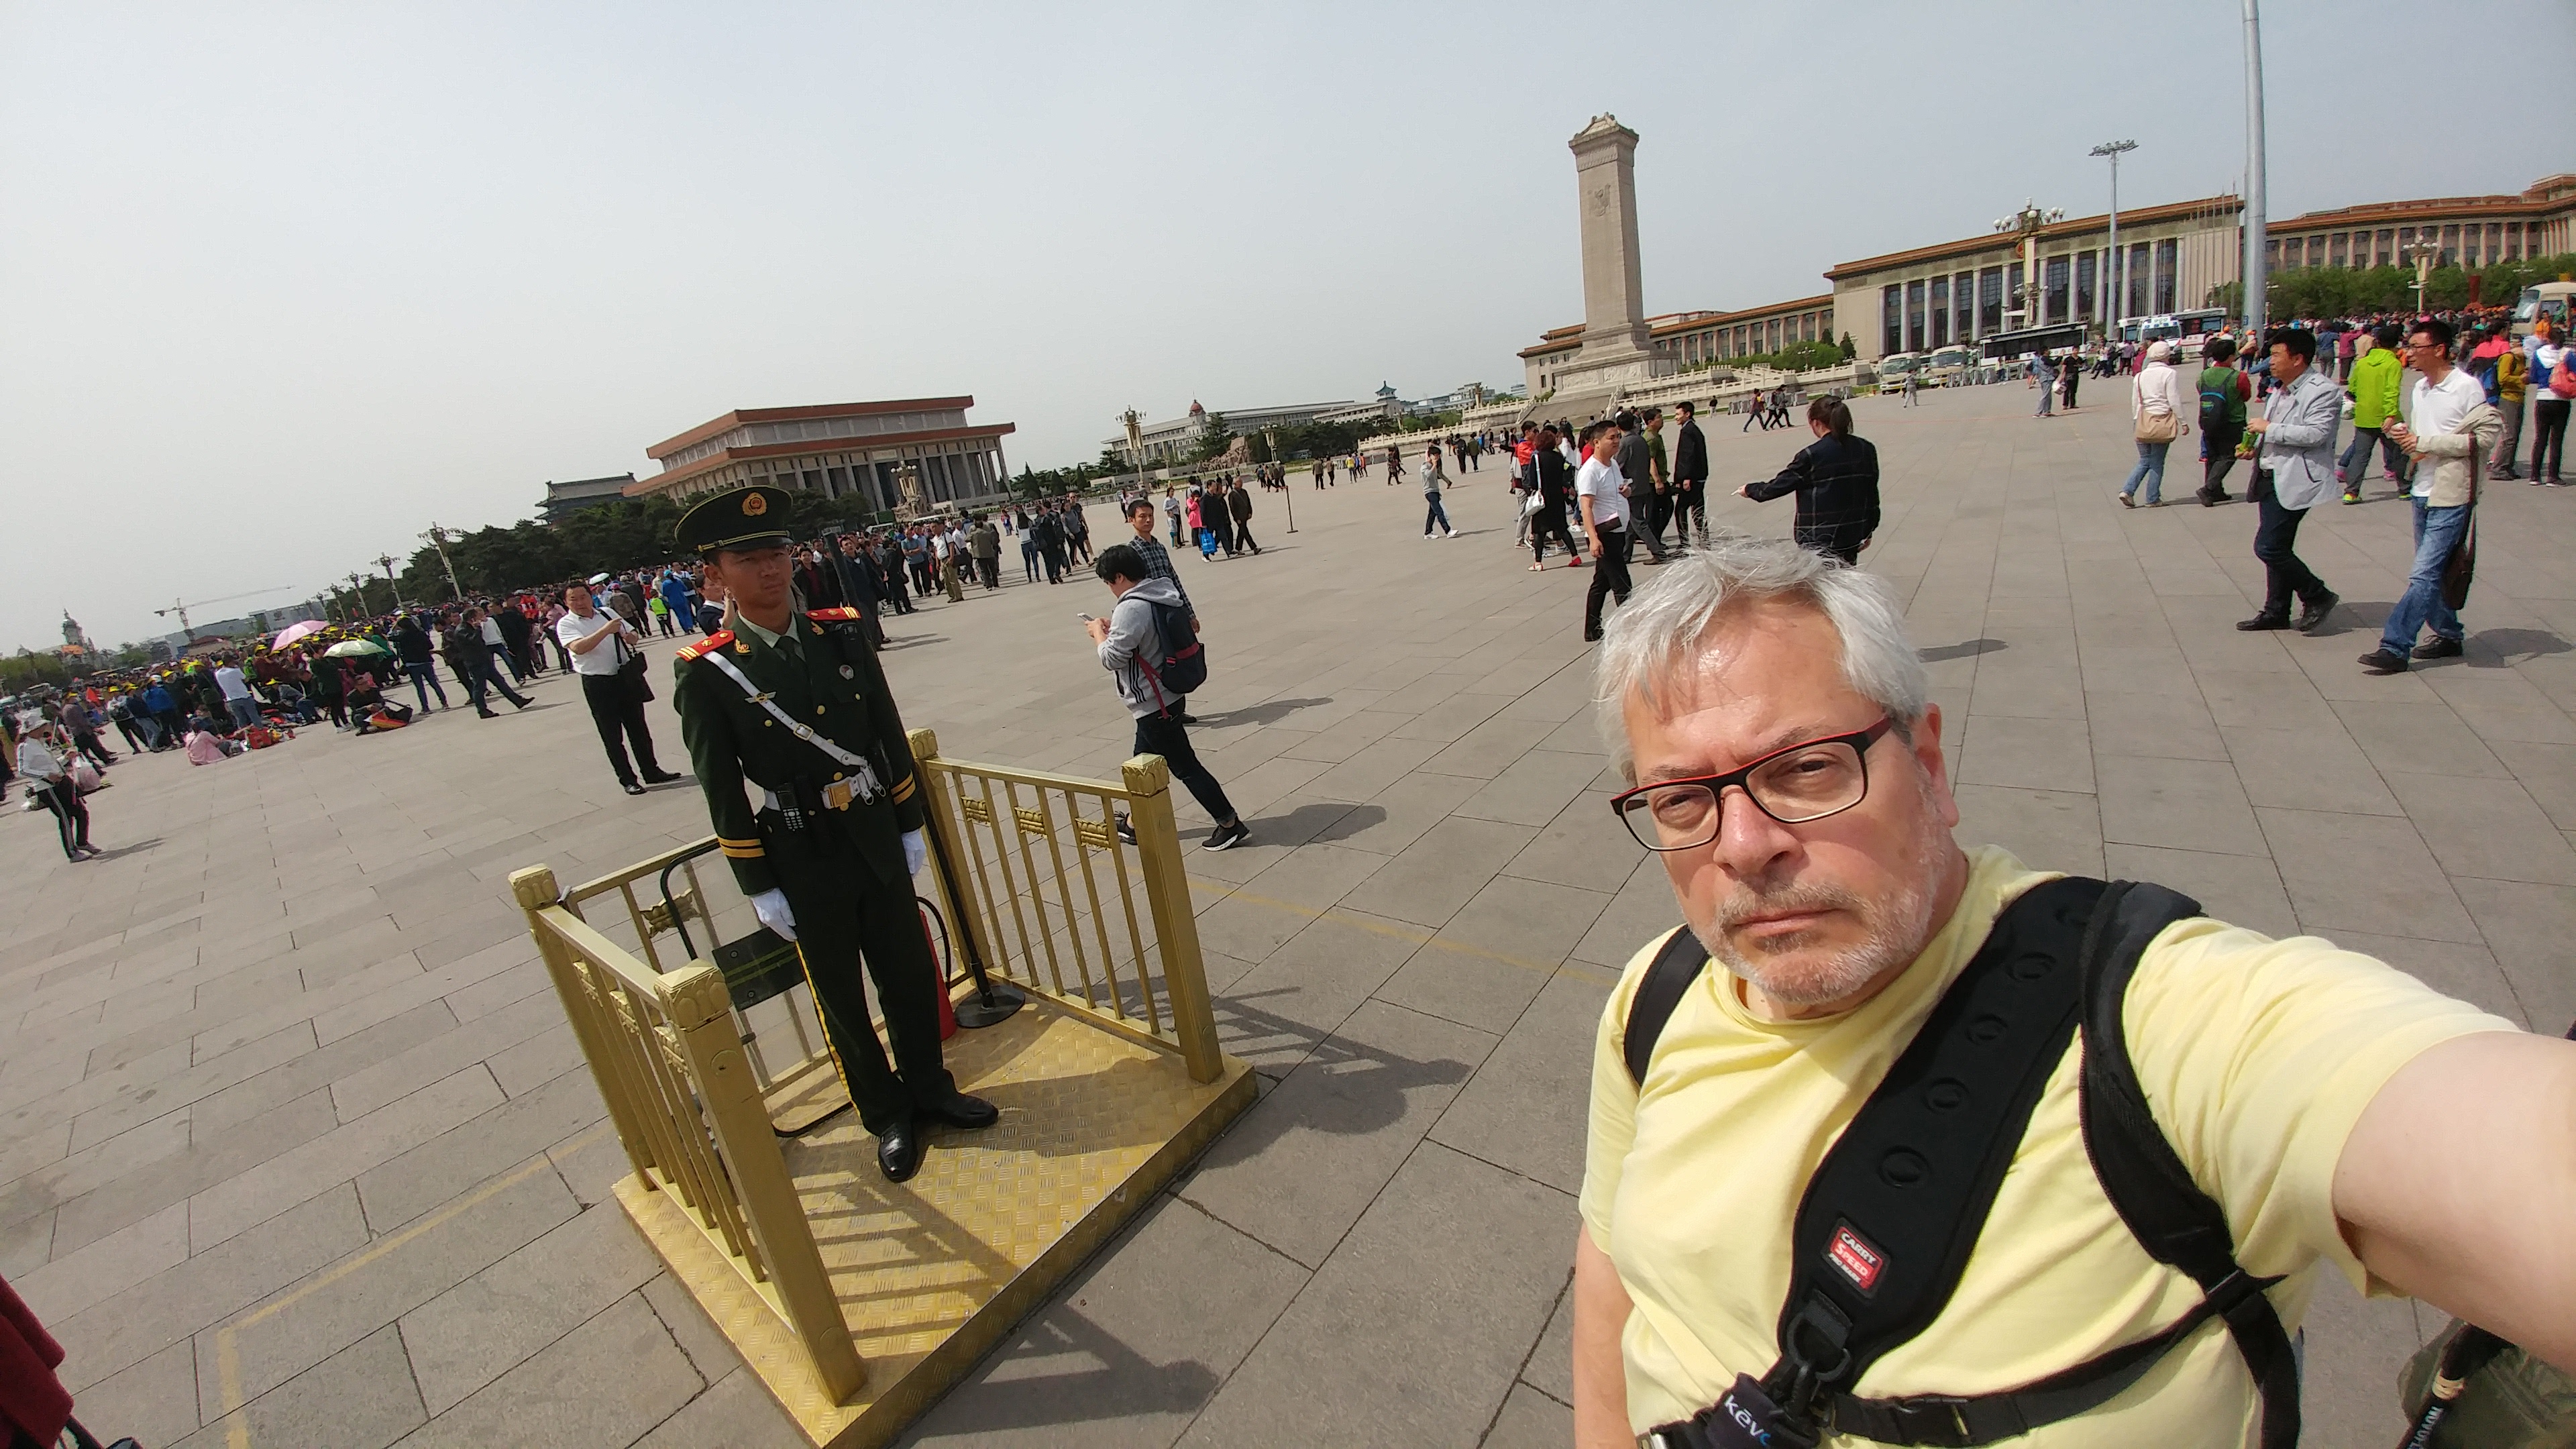 Tiananmen Square selfie covered more than the the human eye peripheral vision can see